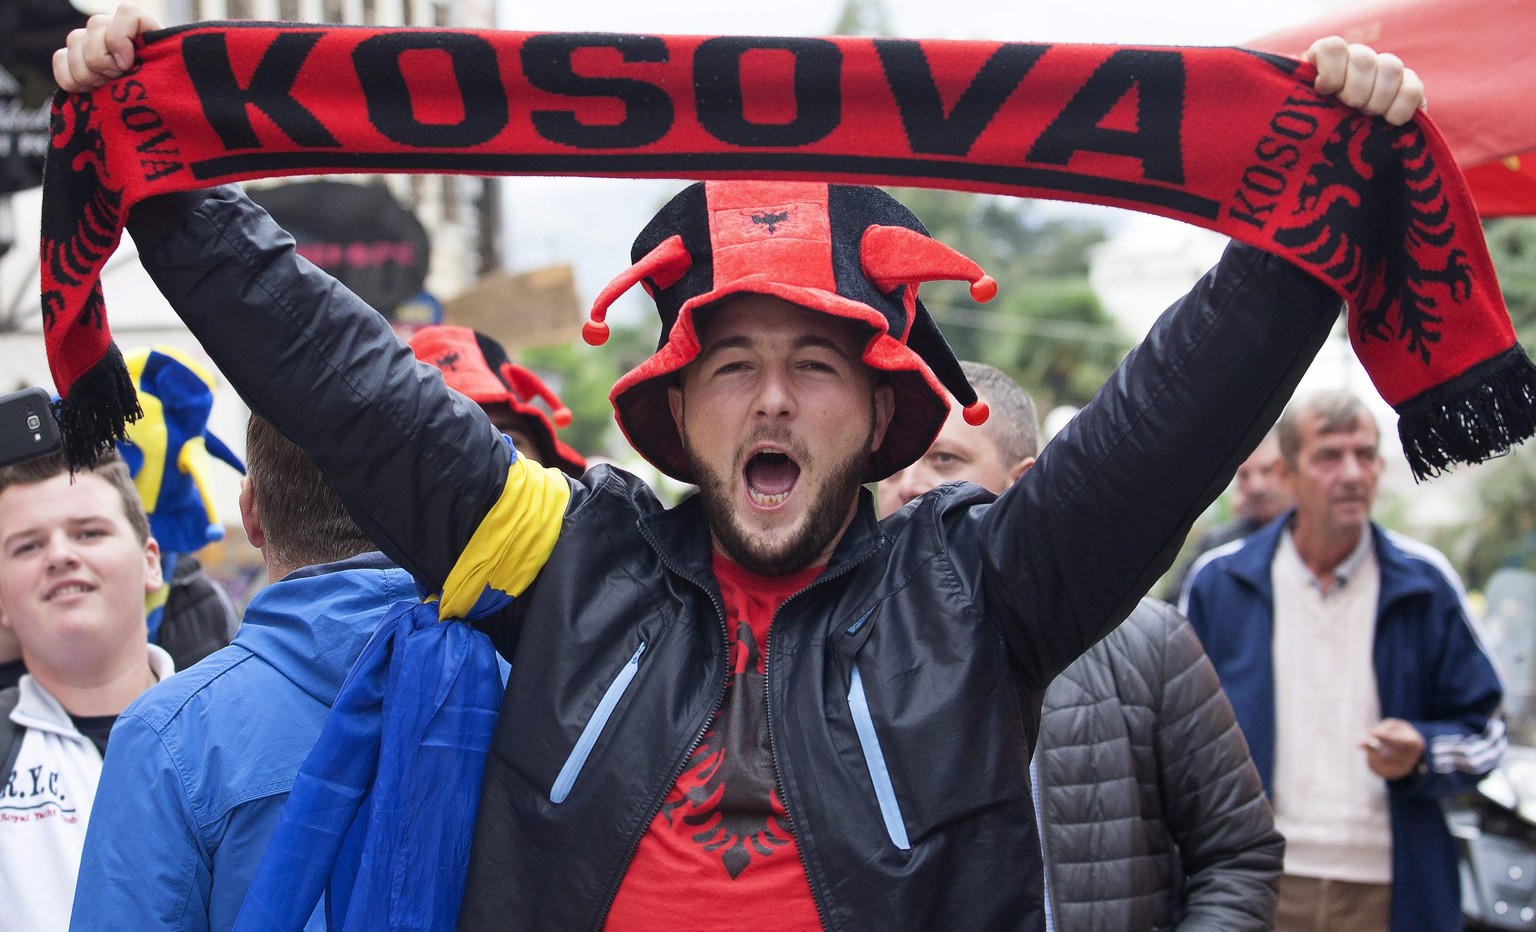 epa05572860 Kosovo fans gather in the city centre of Shkoder, Albania, 06 October 2016, prior to the FIFA World Cup 2018 qualifying soccer match between Kosovo and Croatia. EPA/ARMANDO BABANI